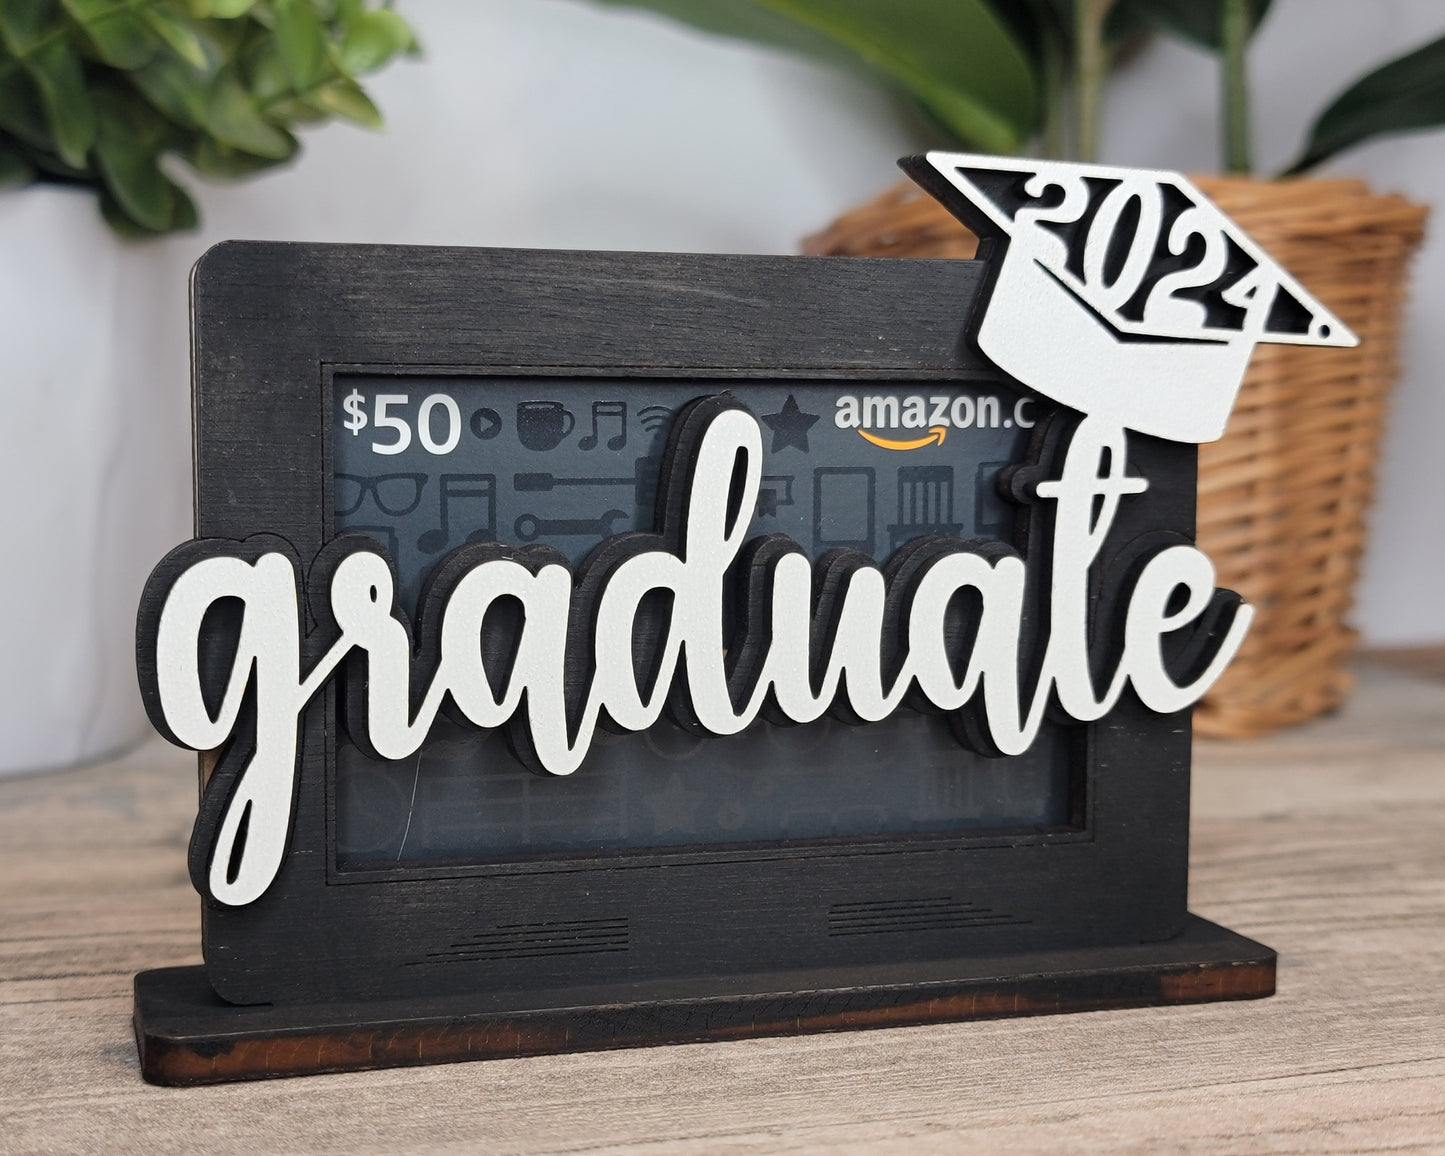 Graduation Gift Card Holders - Includes 5 Designs - Fits all Material Thickness - Tested on Glowforge & Lightburn